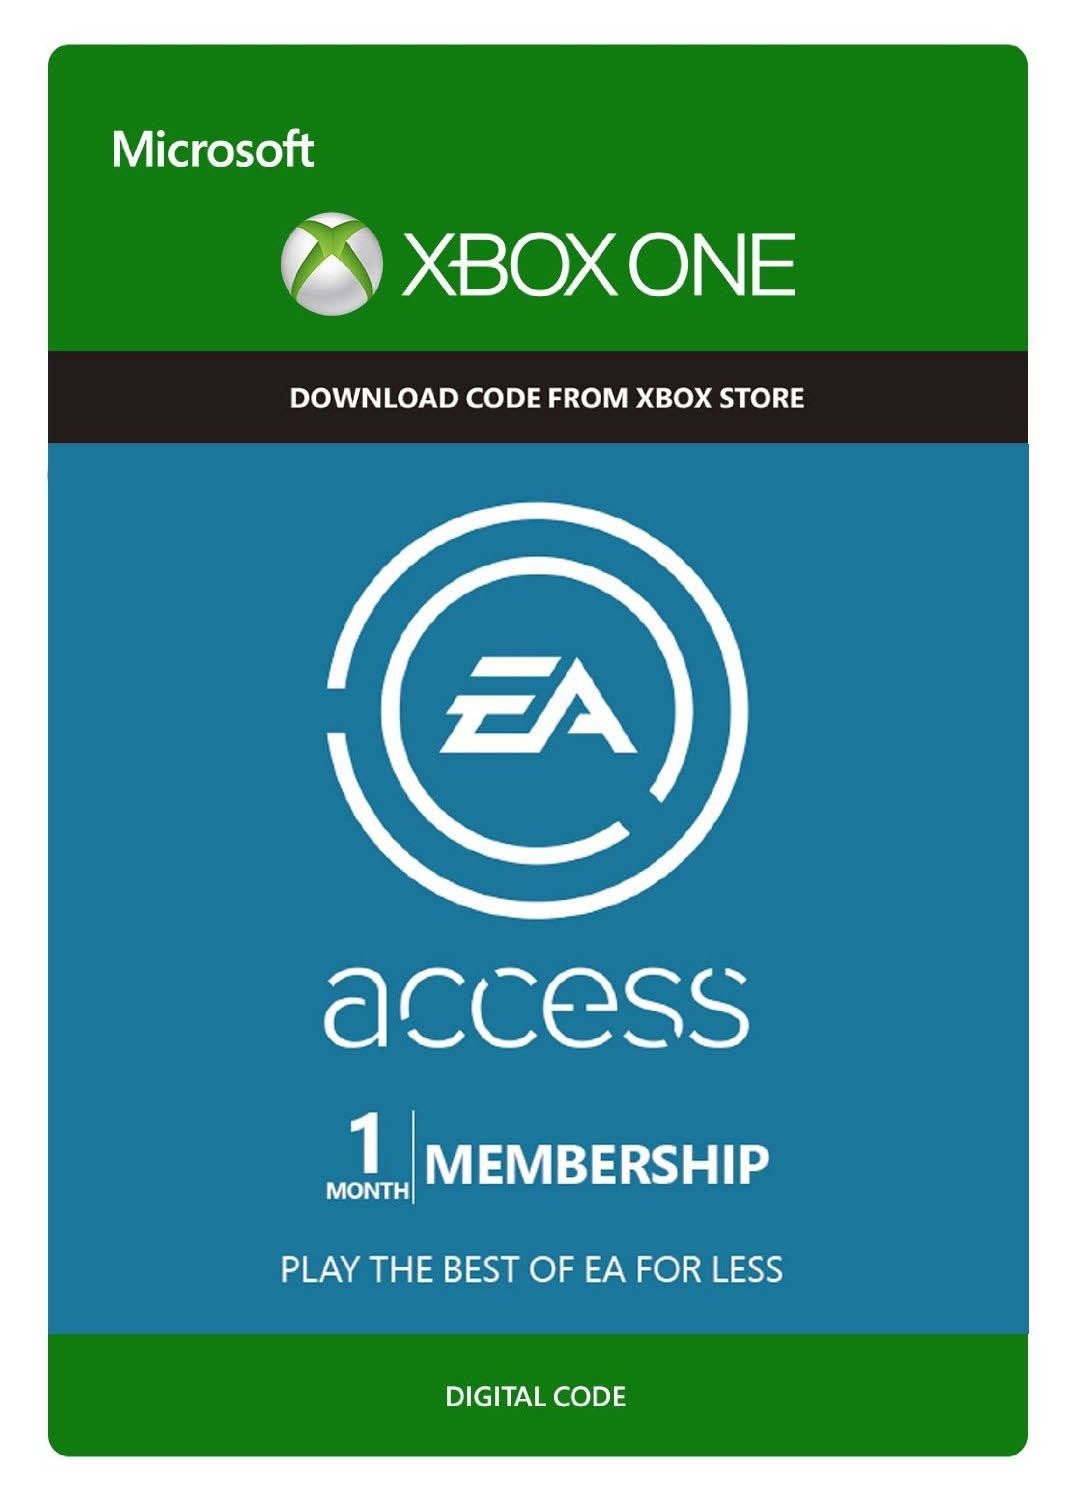 How do you connect to Xbox Live for 12 months free?